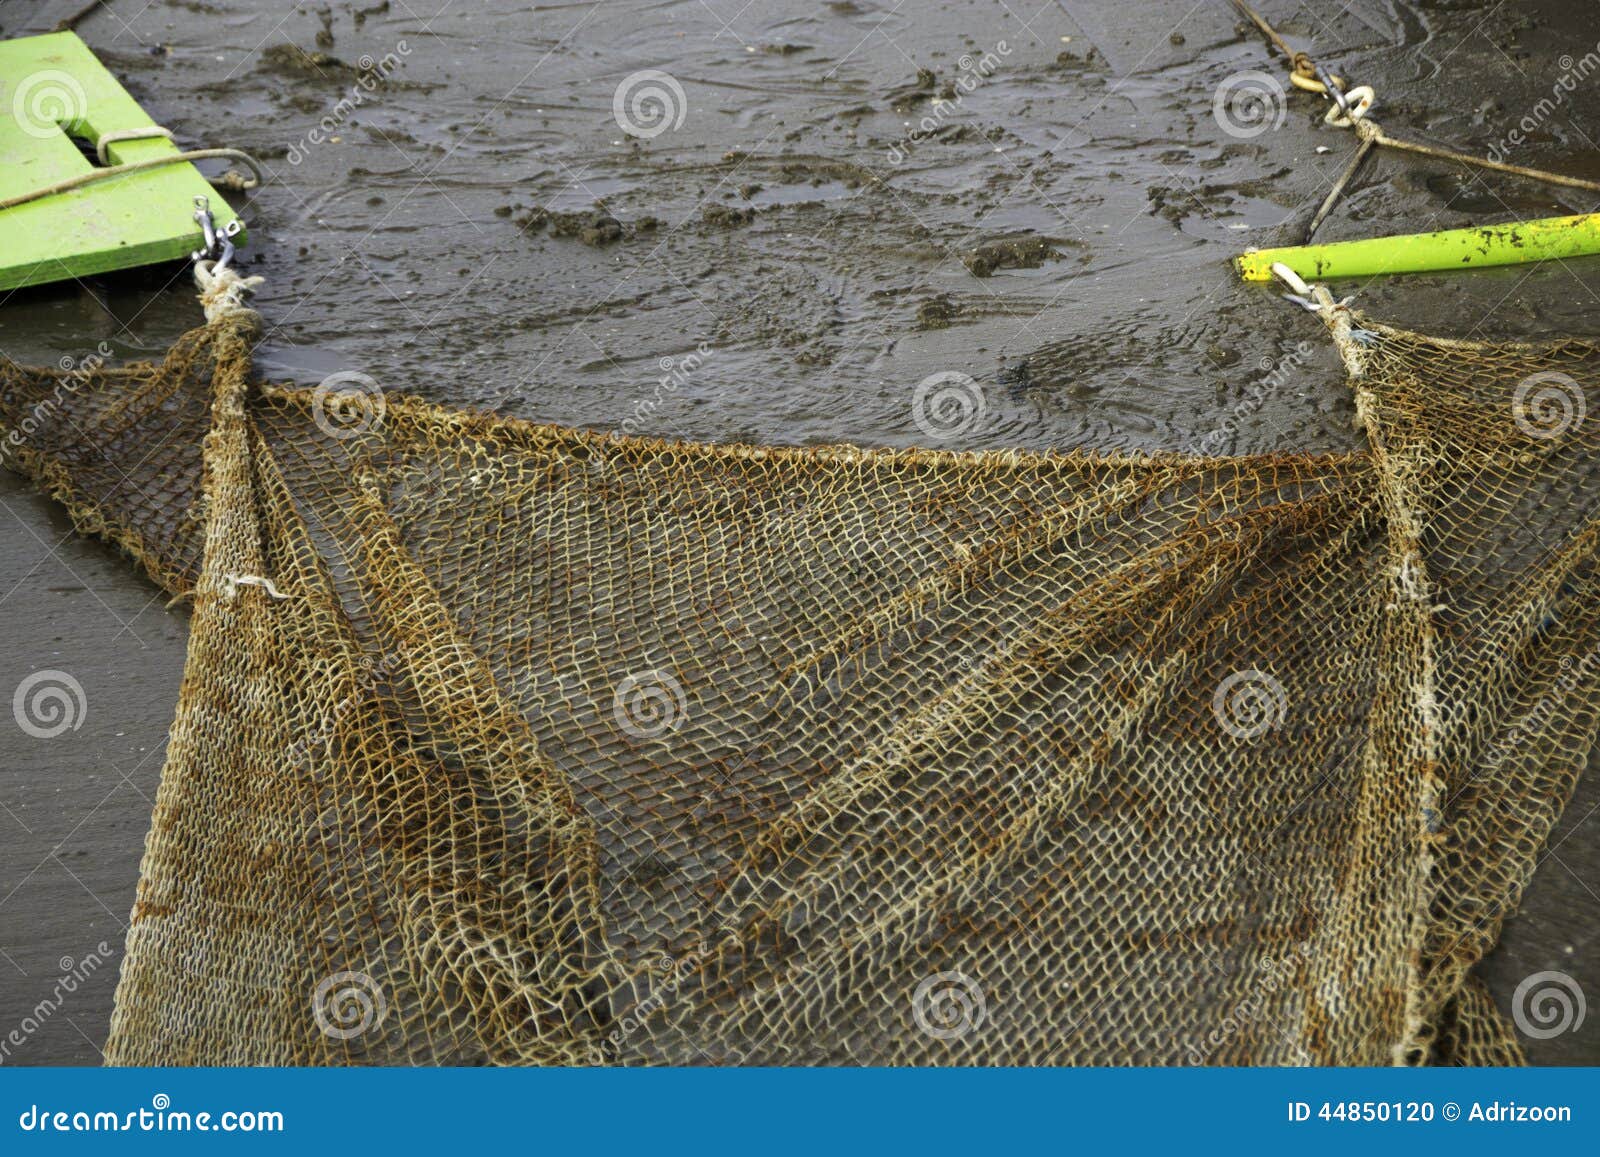 https://thumbs.dreamstime.com/z/dragnet-to-catch-little-fish-long-rope-like-shrimps-crabs-close-beach-44850120.jpg